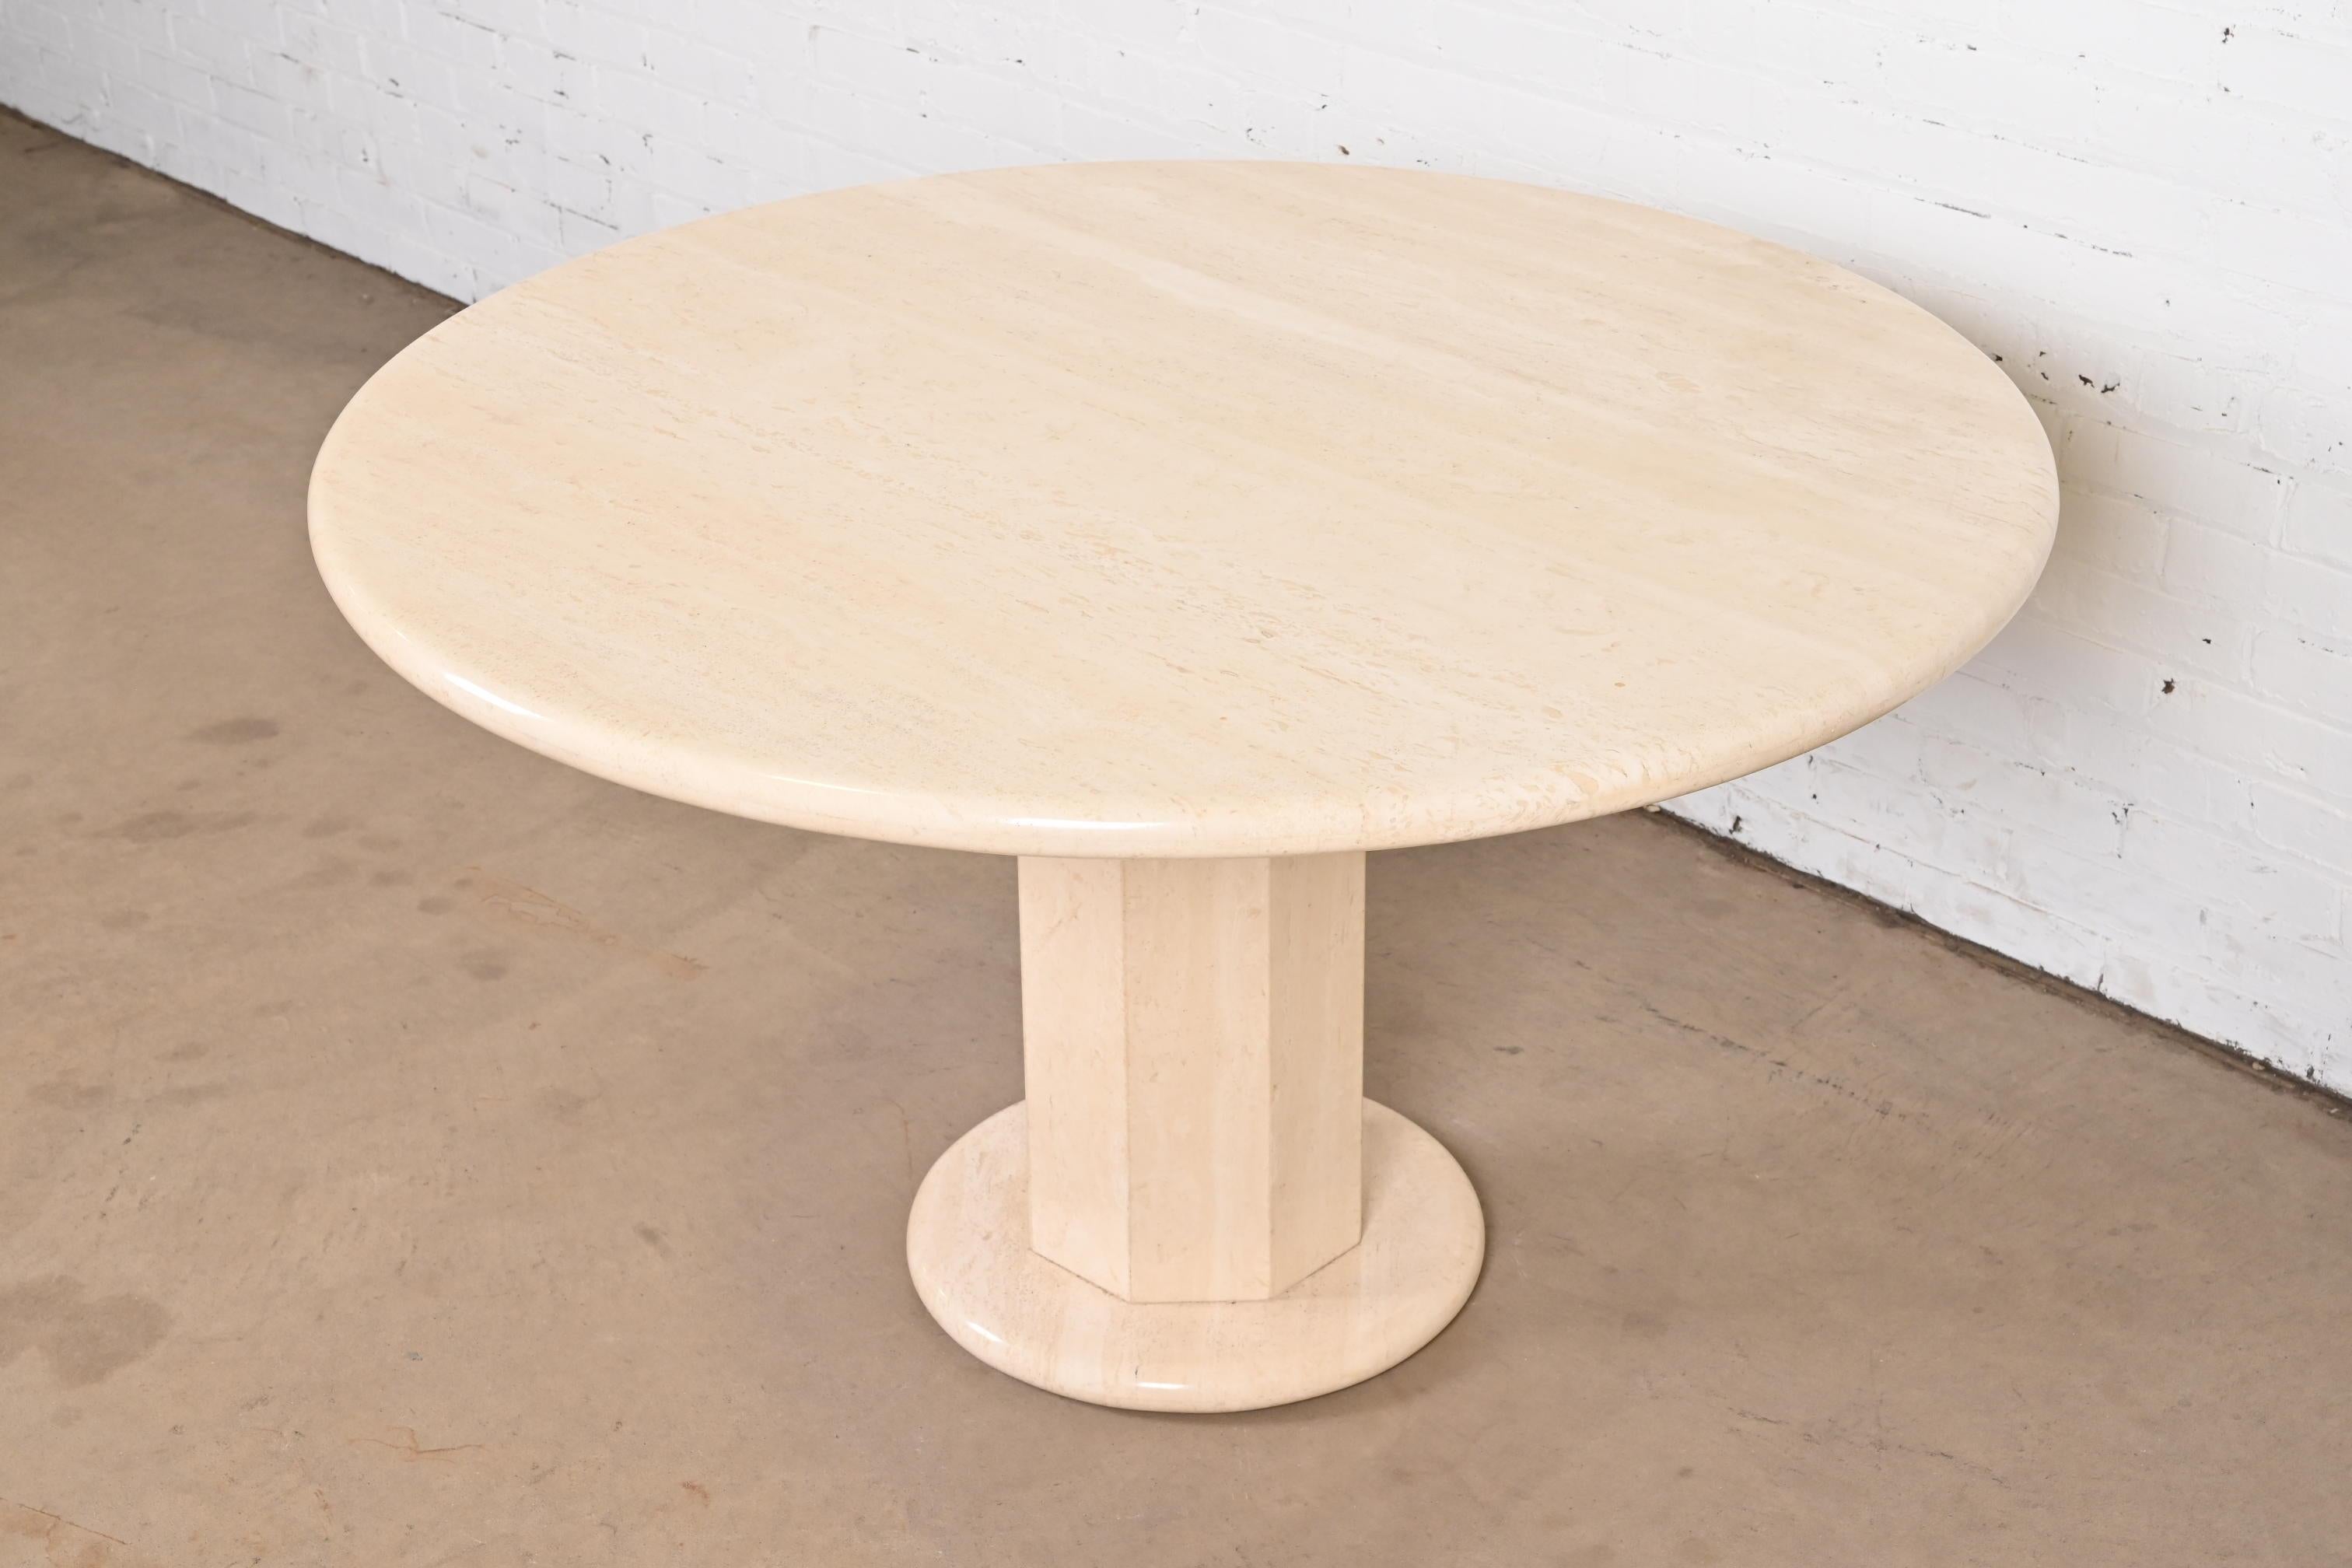 Modern Italian Travertine Round Pedestal Dining or Center Table by Ello, 1970s In Good Condition For Sale In South Bend, IN